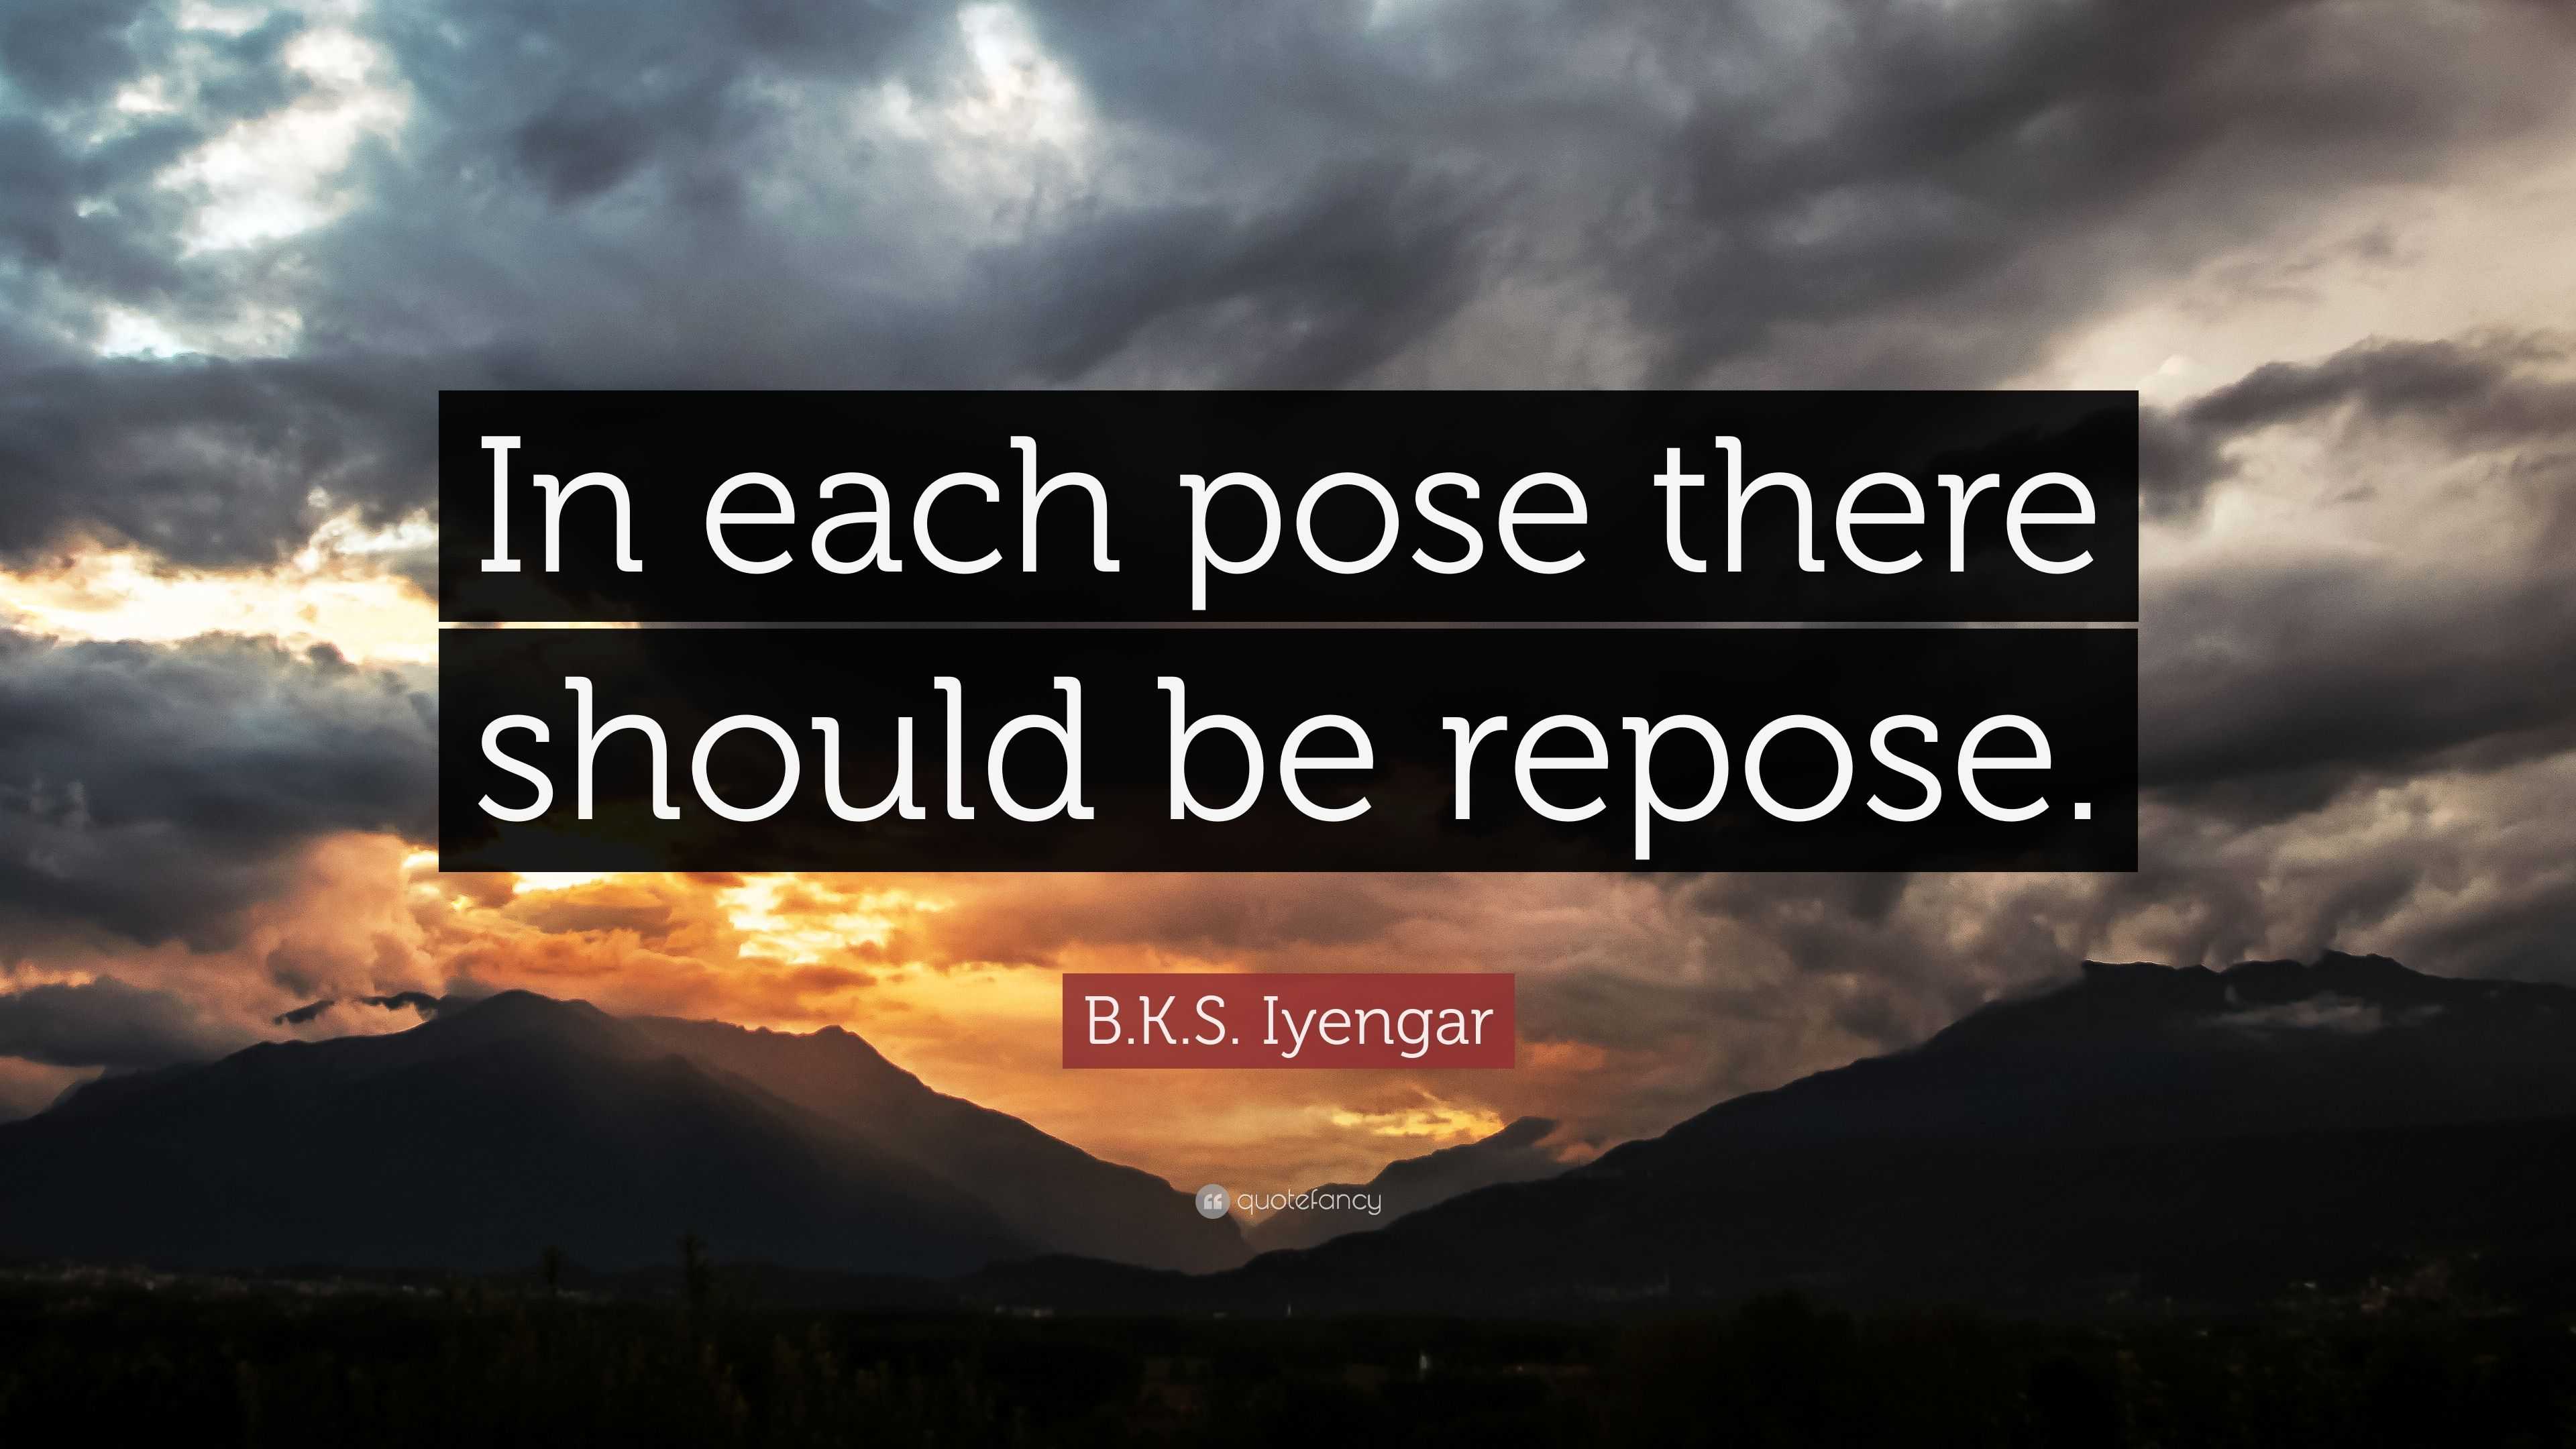 2505415 B K S Iyengar Quote In each pose there should be repose